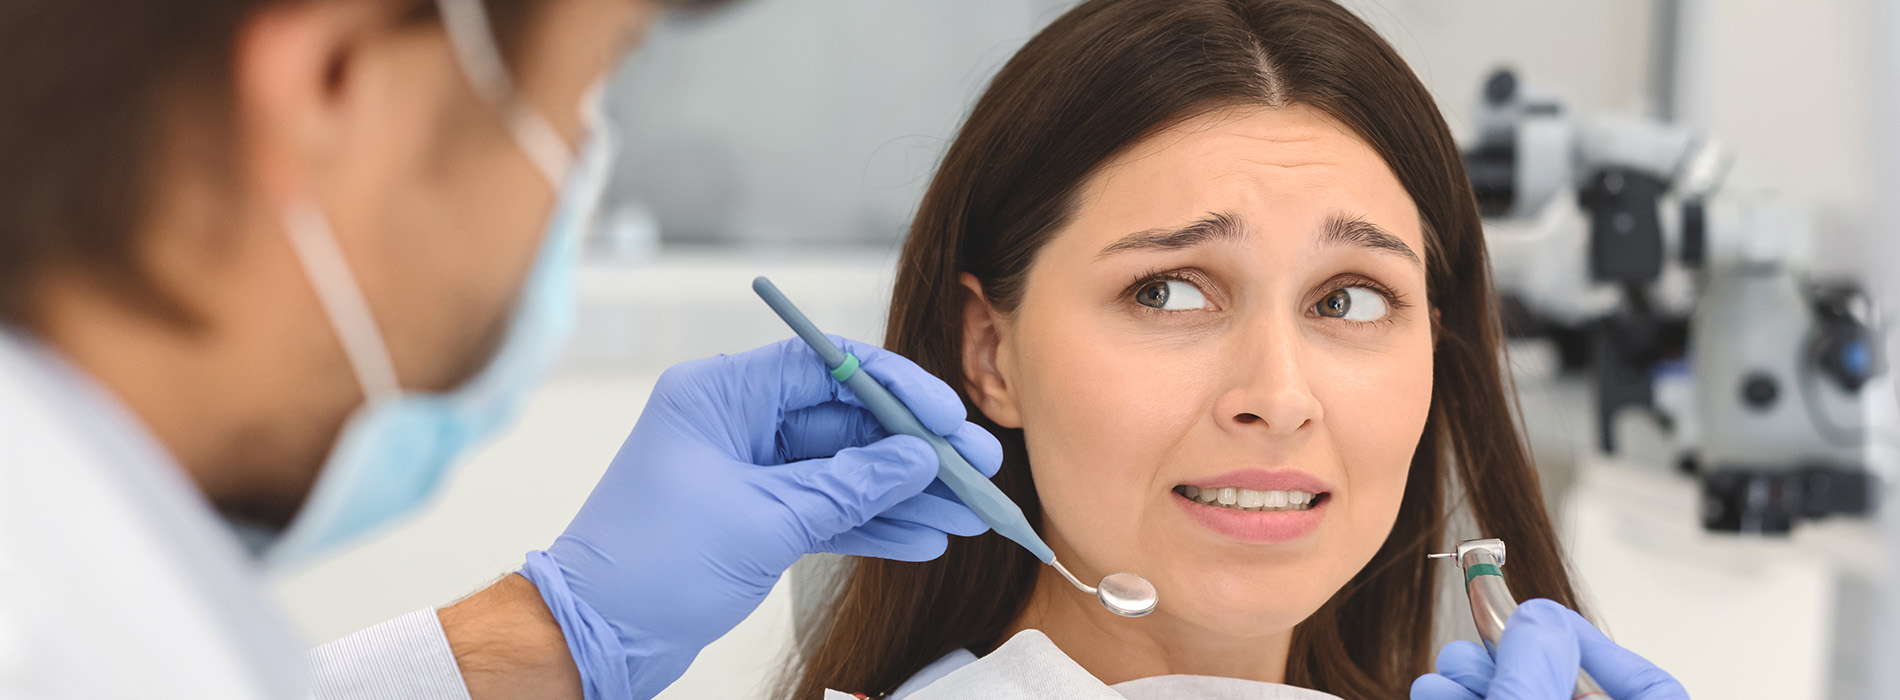 Cherry Hill Dental Excellence | Botox for TMJ and Headache Pain, Endodontics and Restorative Dentistry